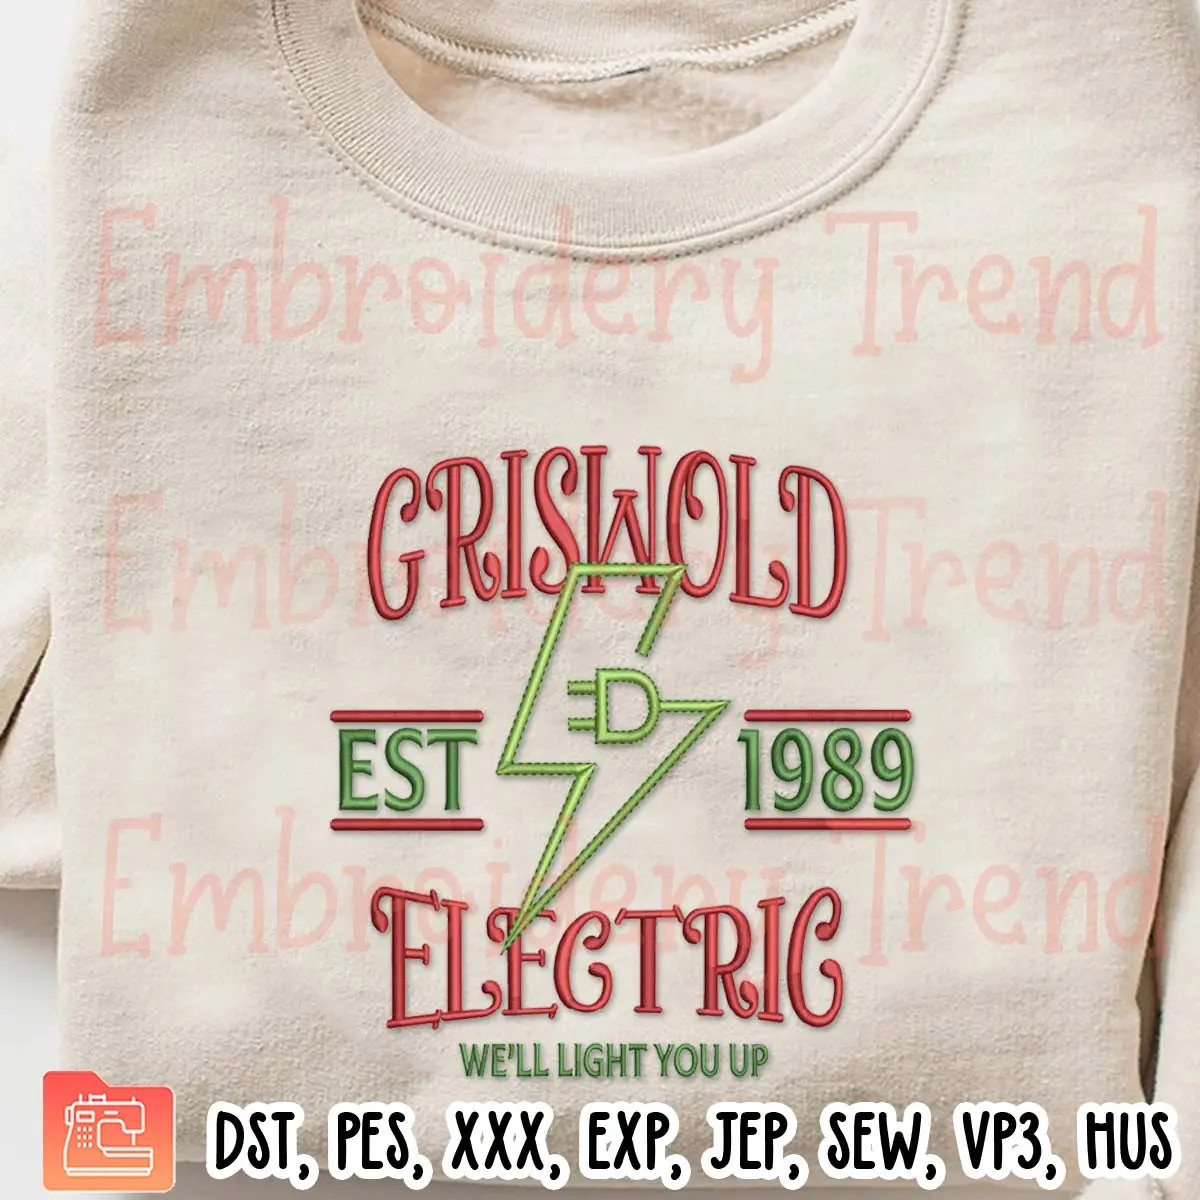 Griswold Electric Est 1989 Embroidery Design, Clark Griswold Christmas Embroidery Digitizing File